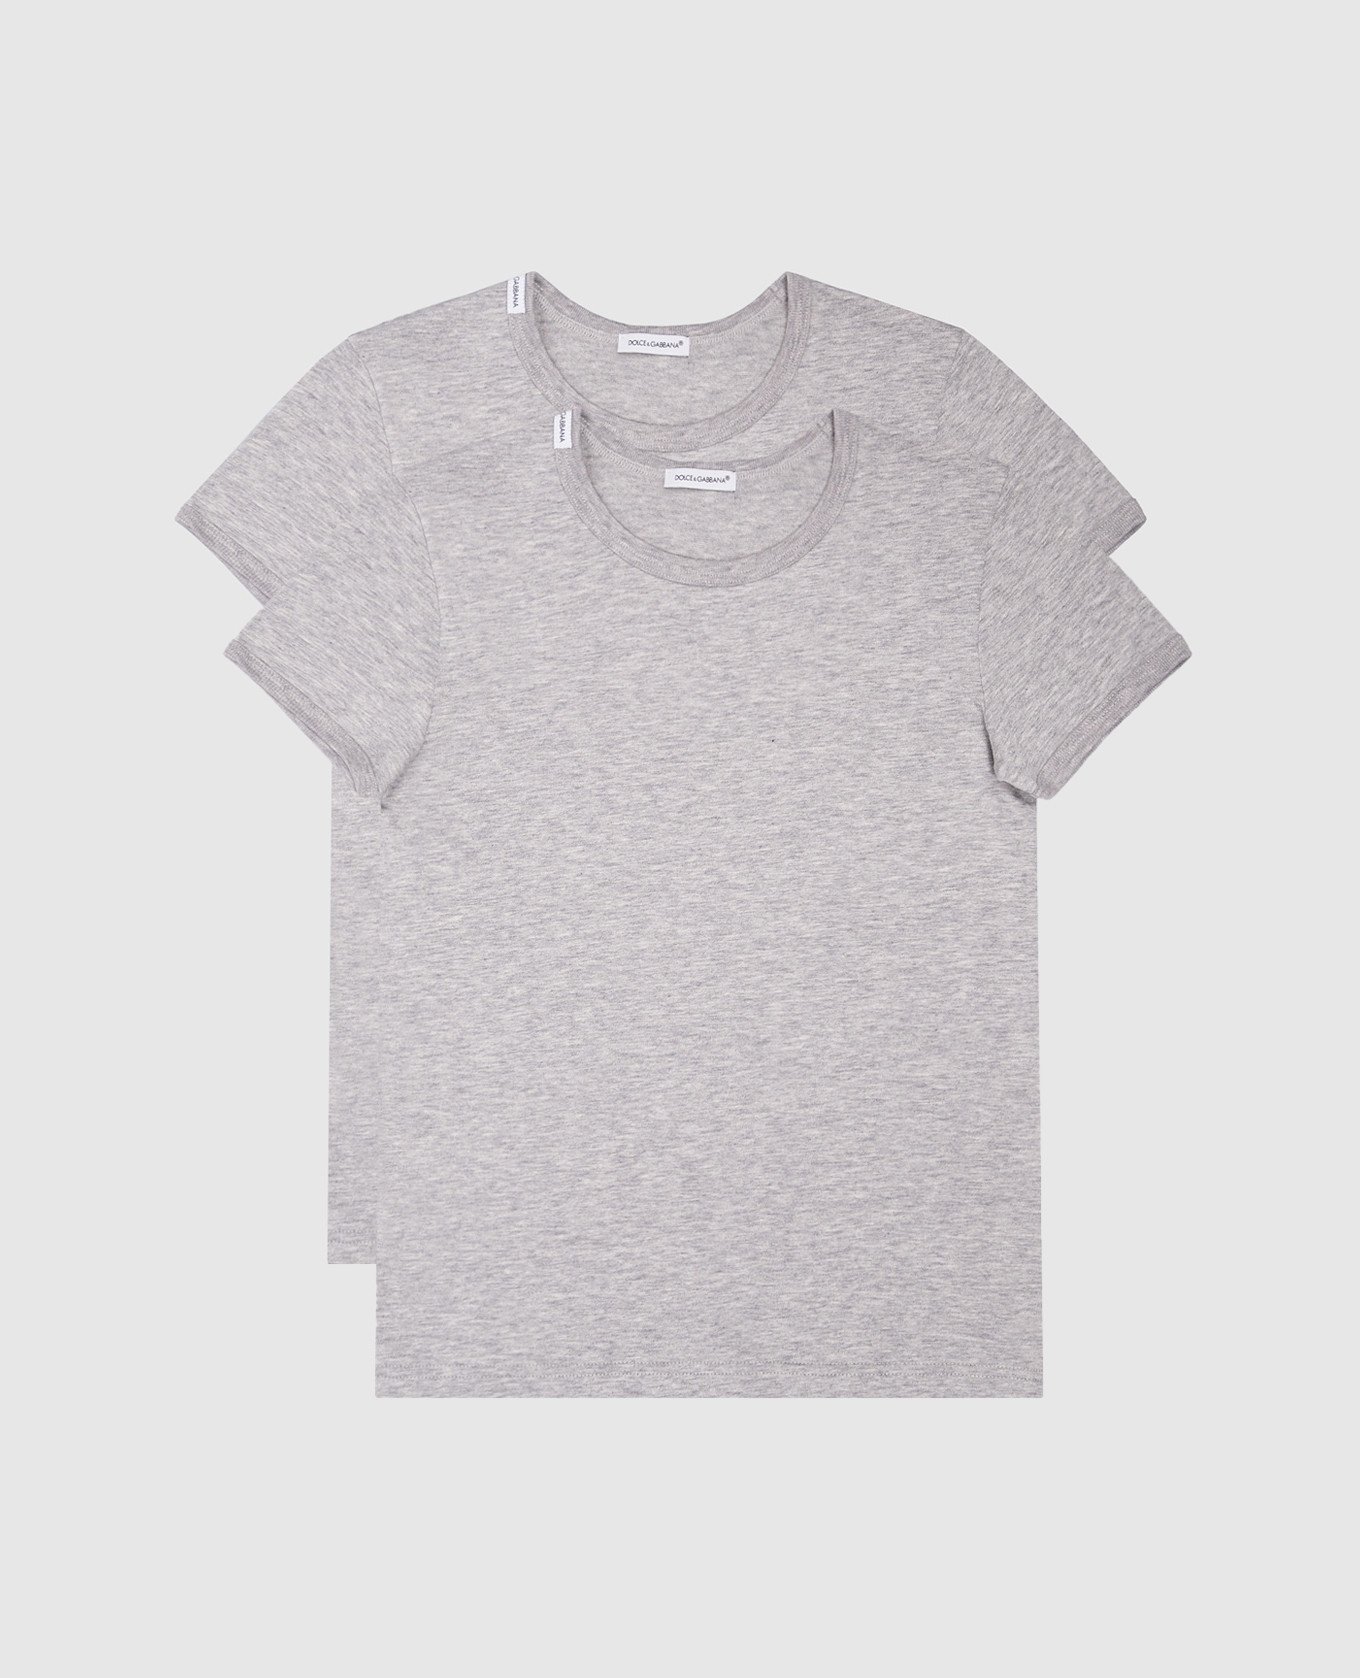 Children's set of gray t-shirts with a logo